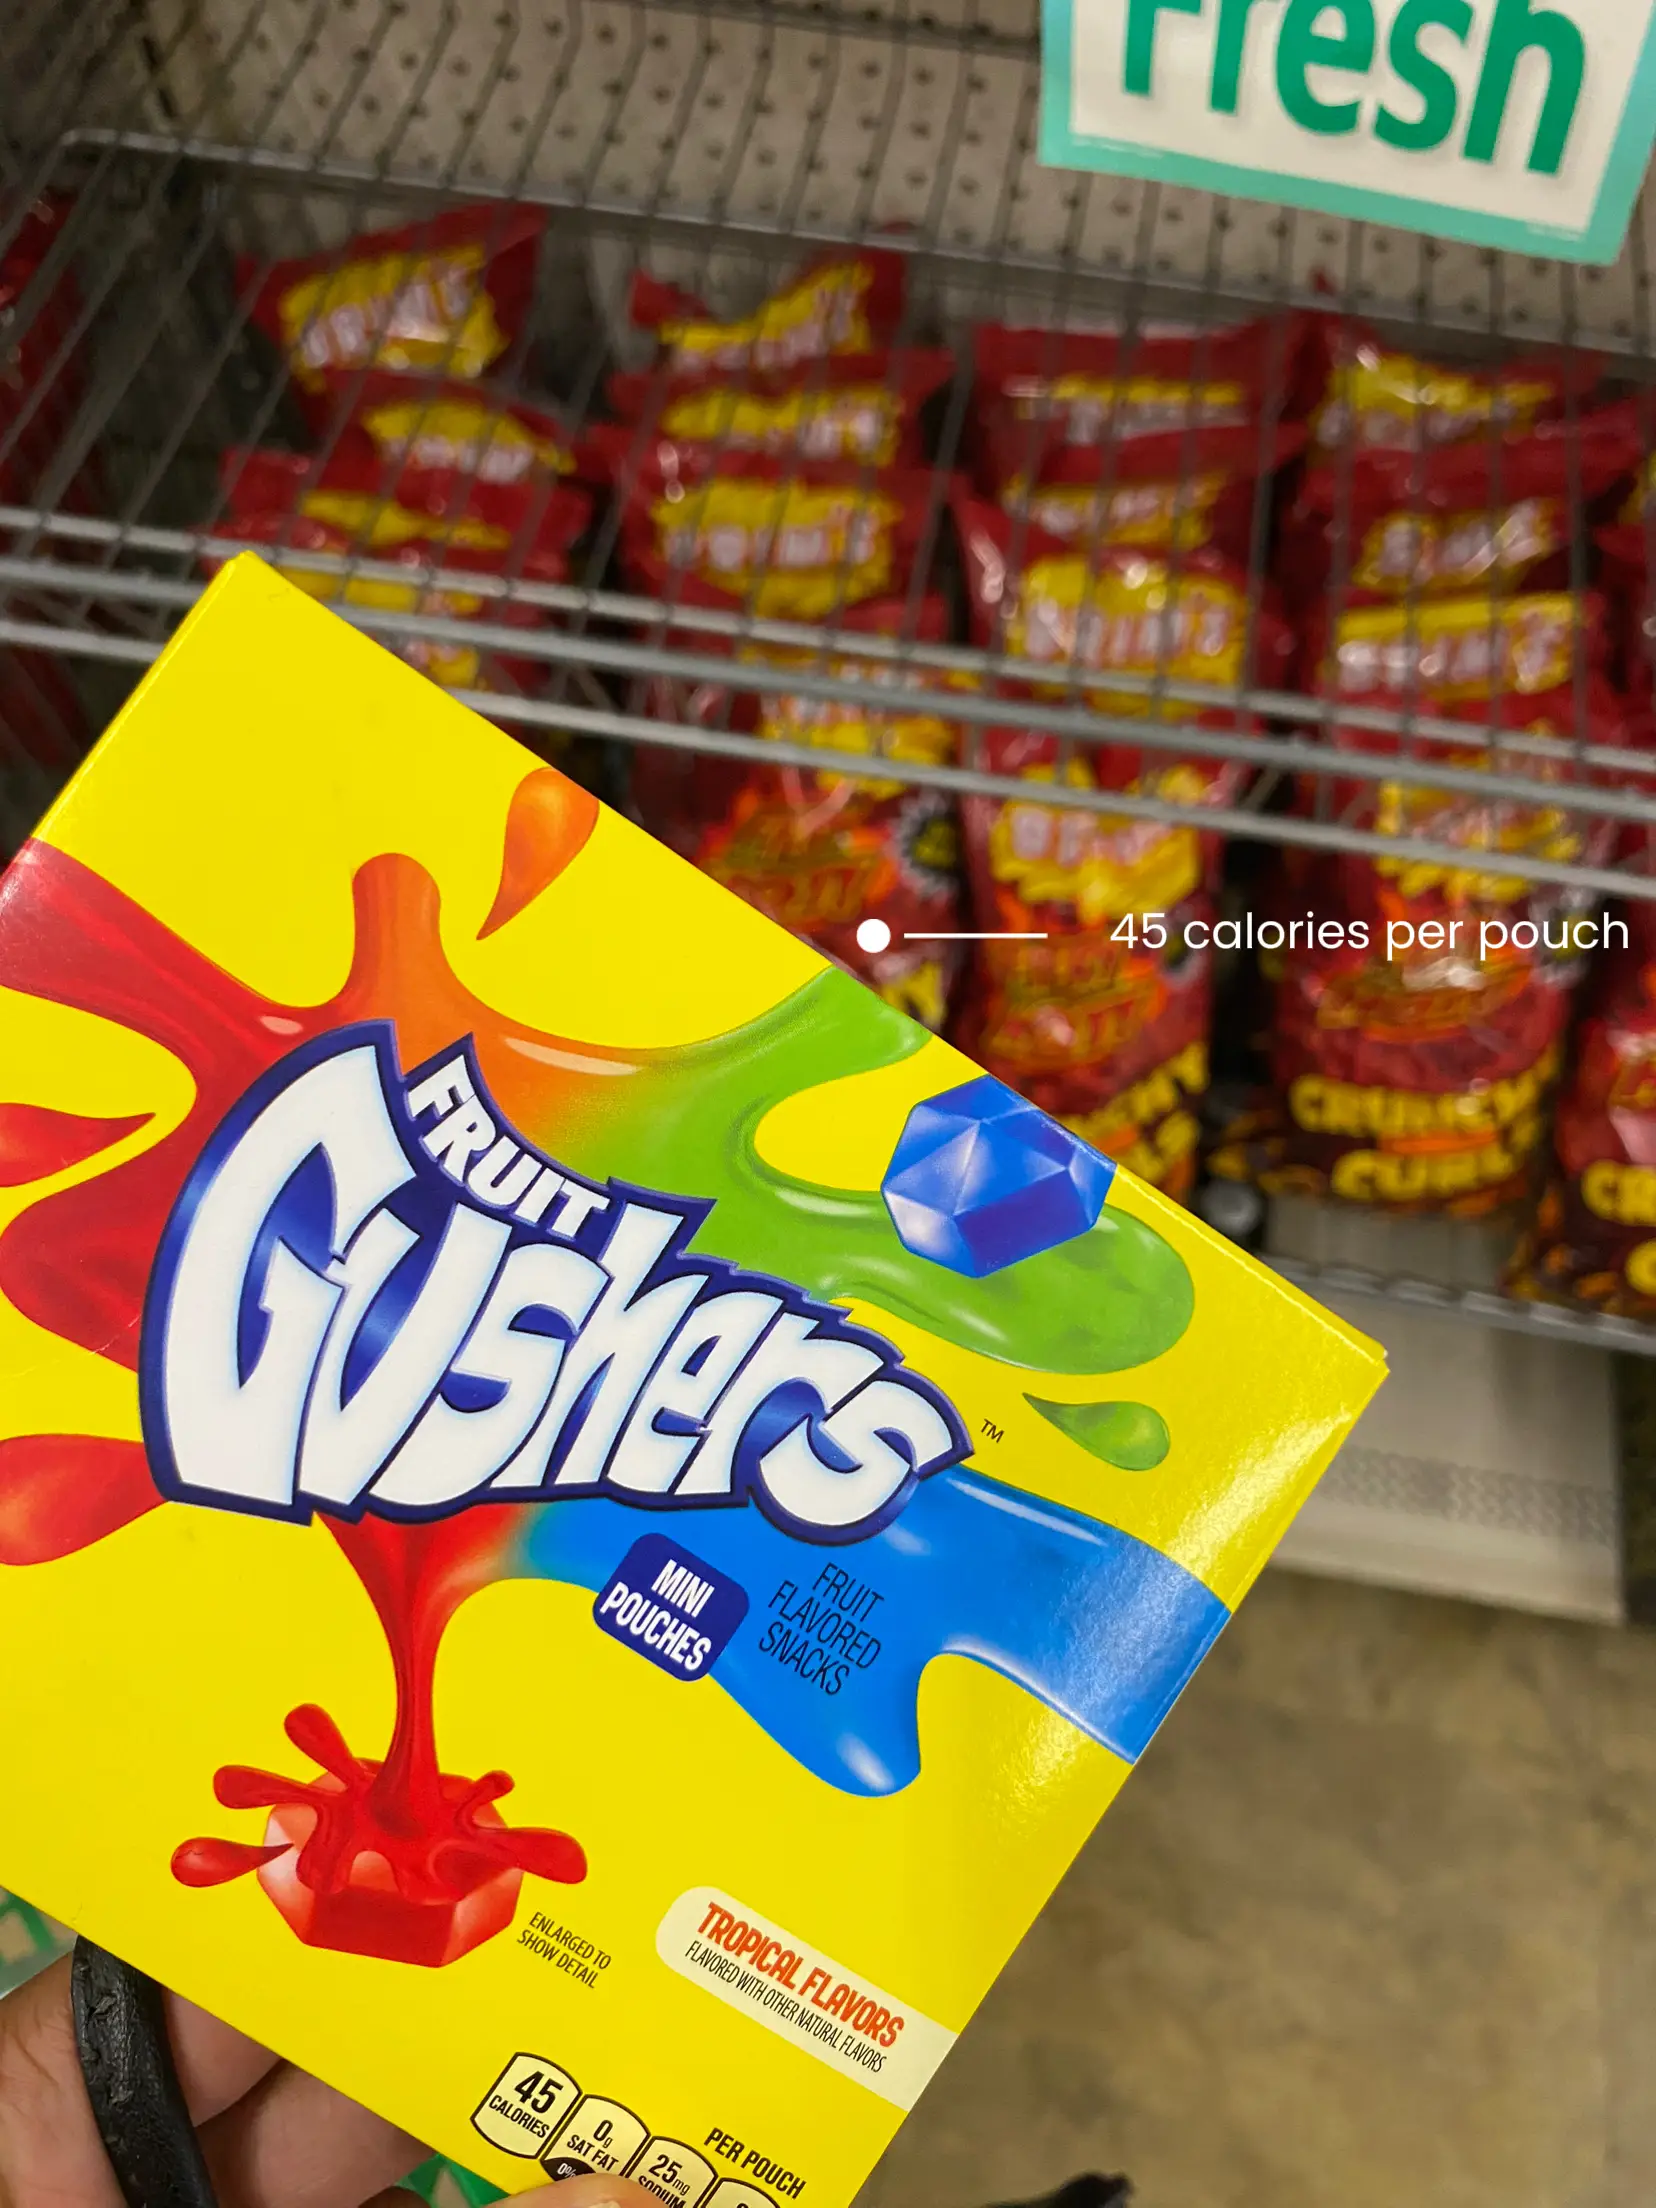 Fruit Snapchat Filters Look Like Gushers Ads